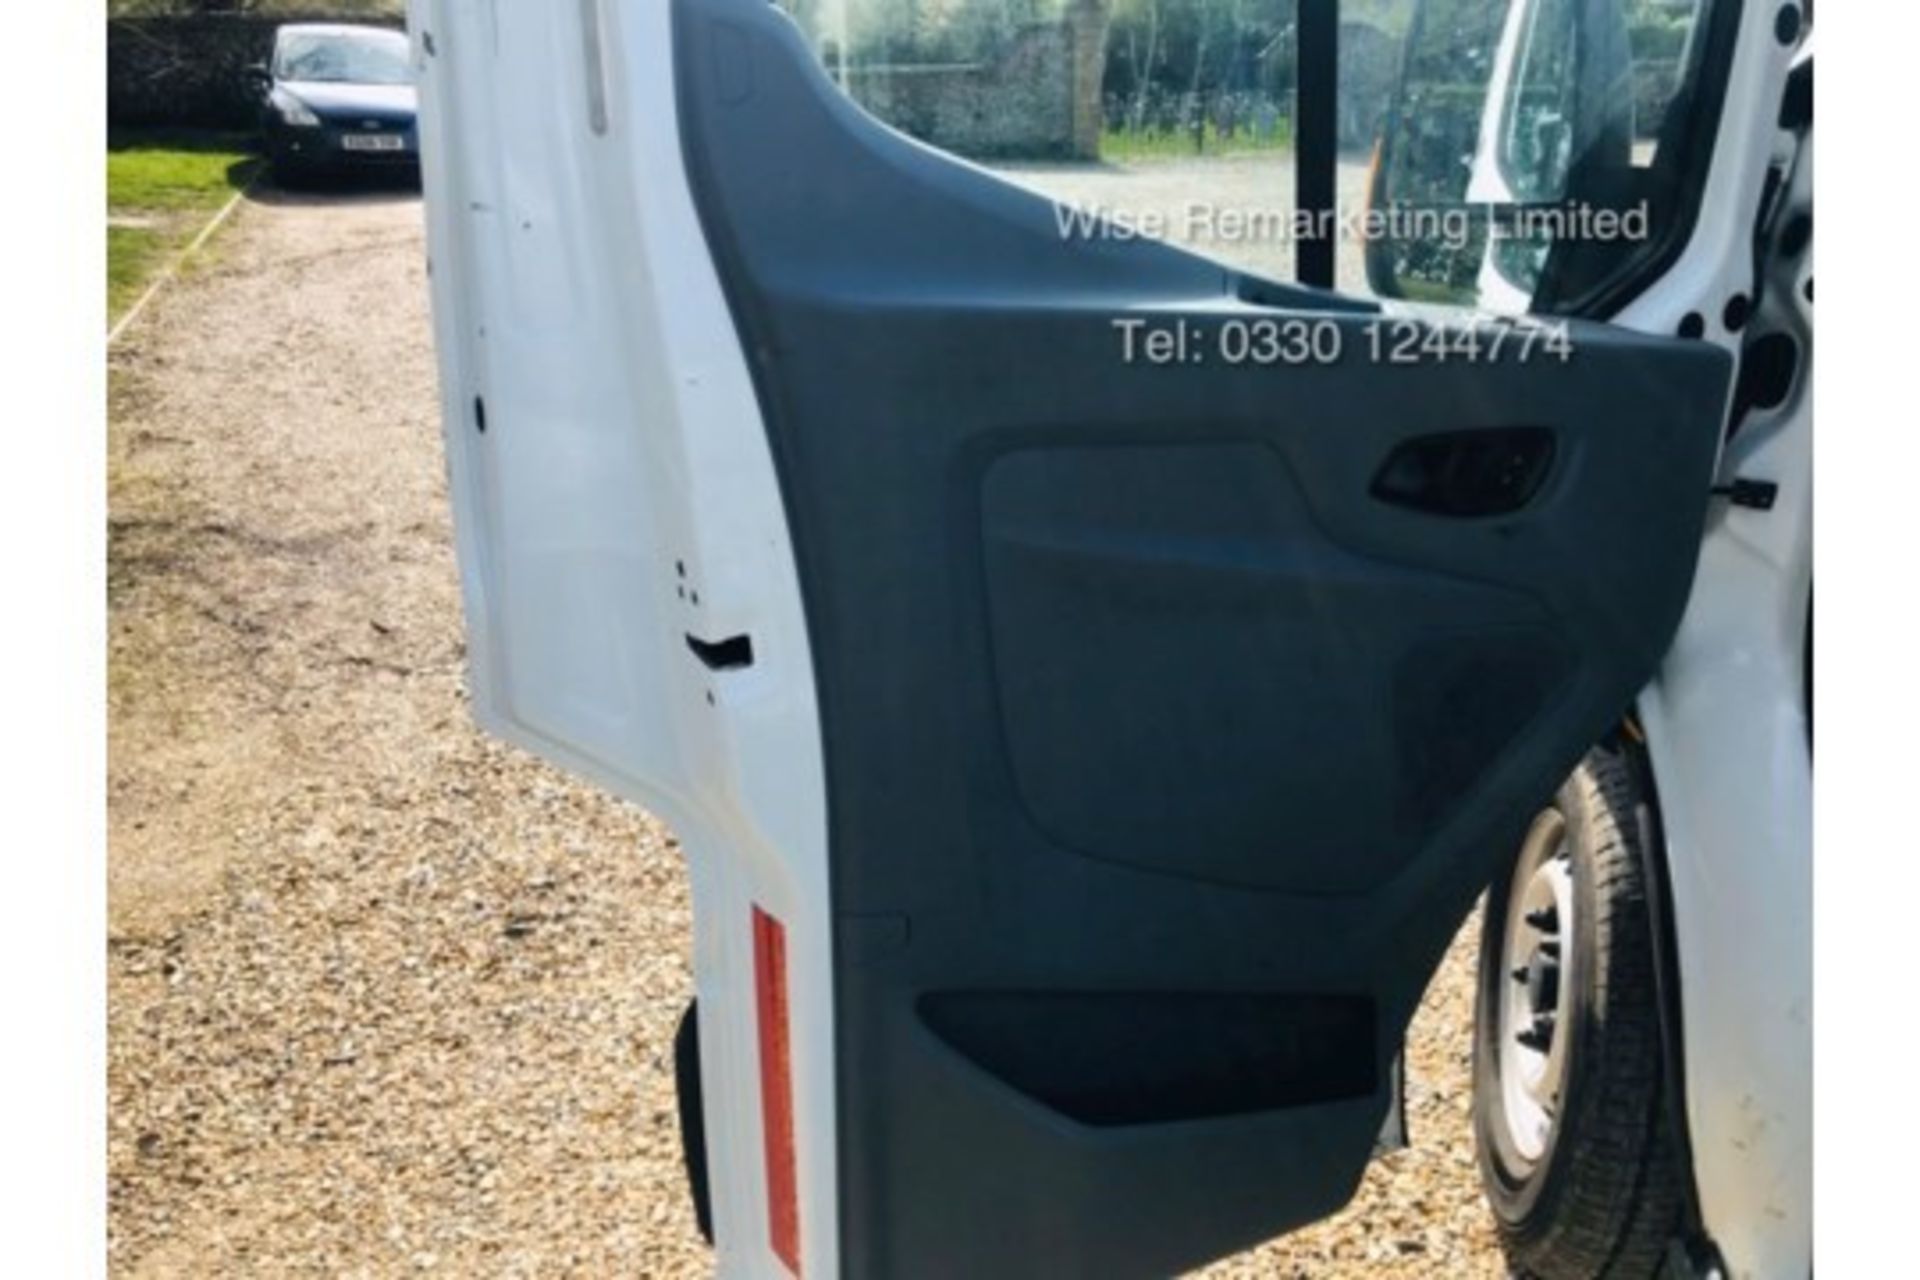 Ford Transit 350 2.0 TDCI Double Cab Tipper 2018 Model - 1 Owner From New - Image 7 of 15